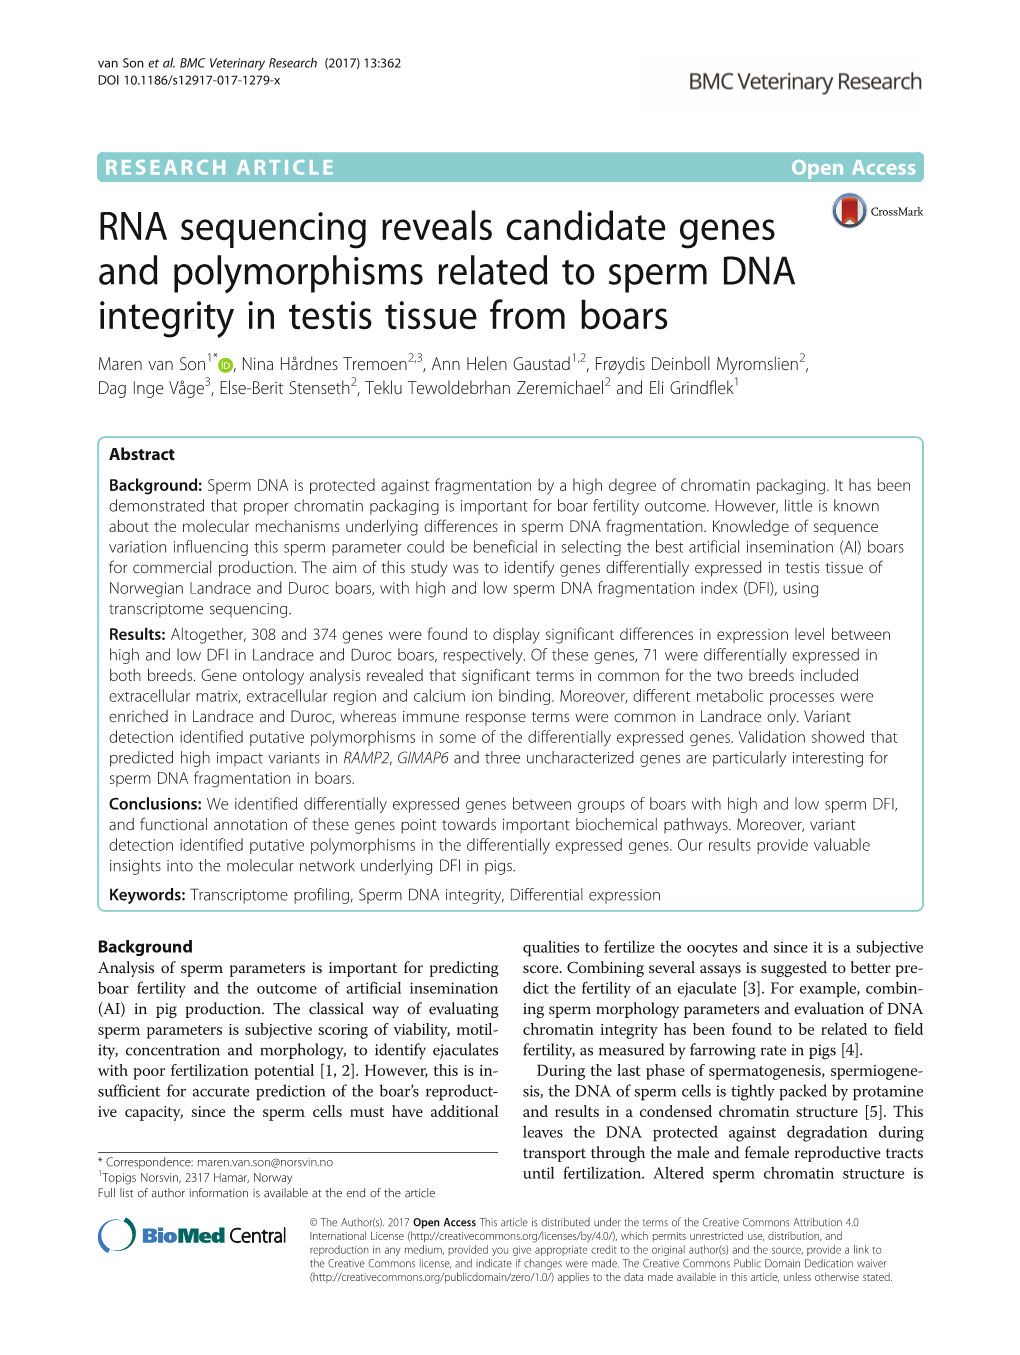 RNA Sequencing Reveals Candidate Genes and Polymorphisms Related